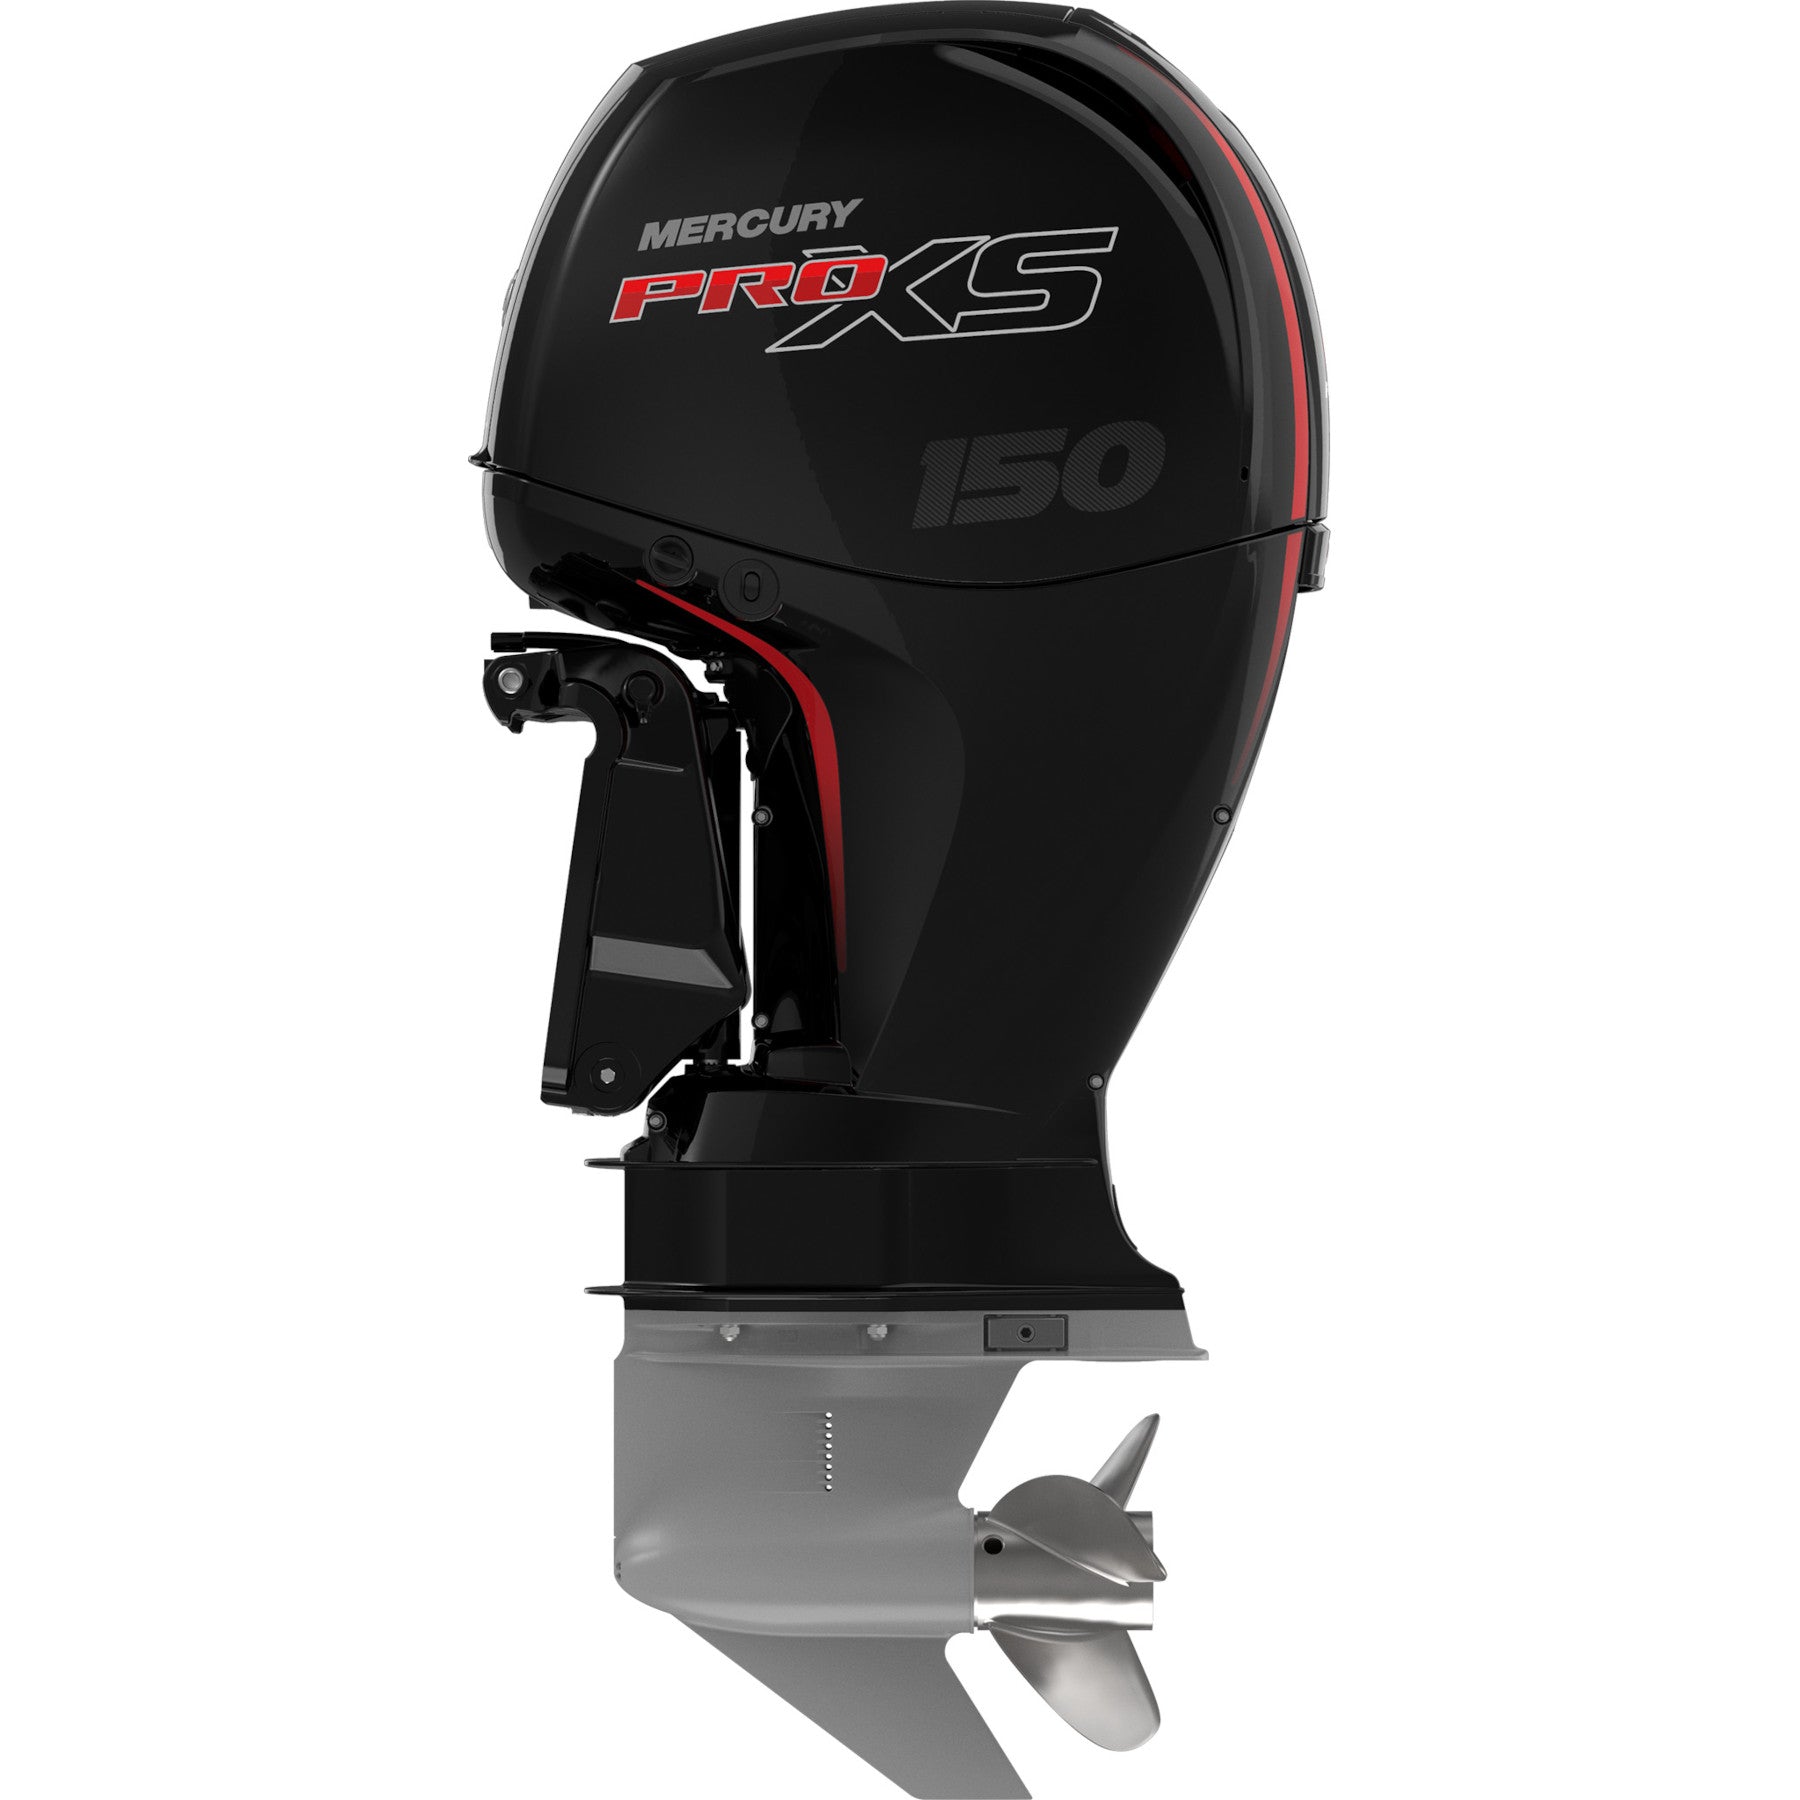 Pro XS 150HP Outboard